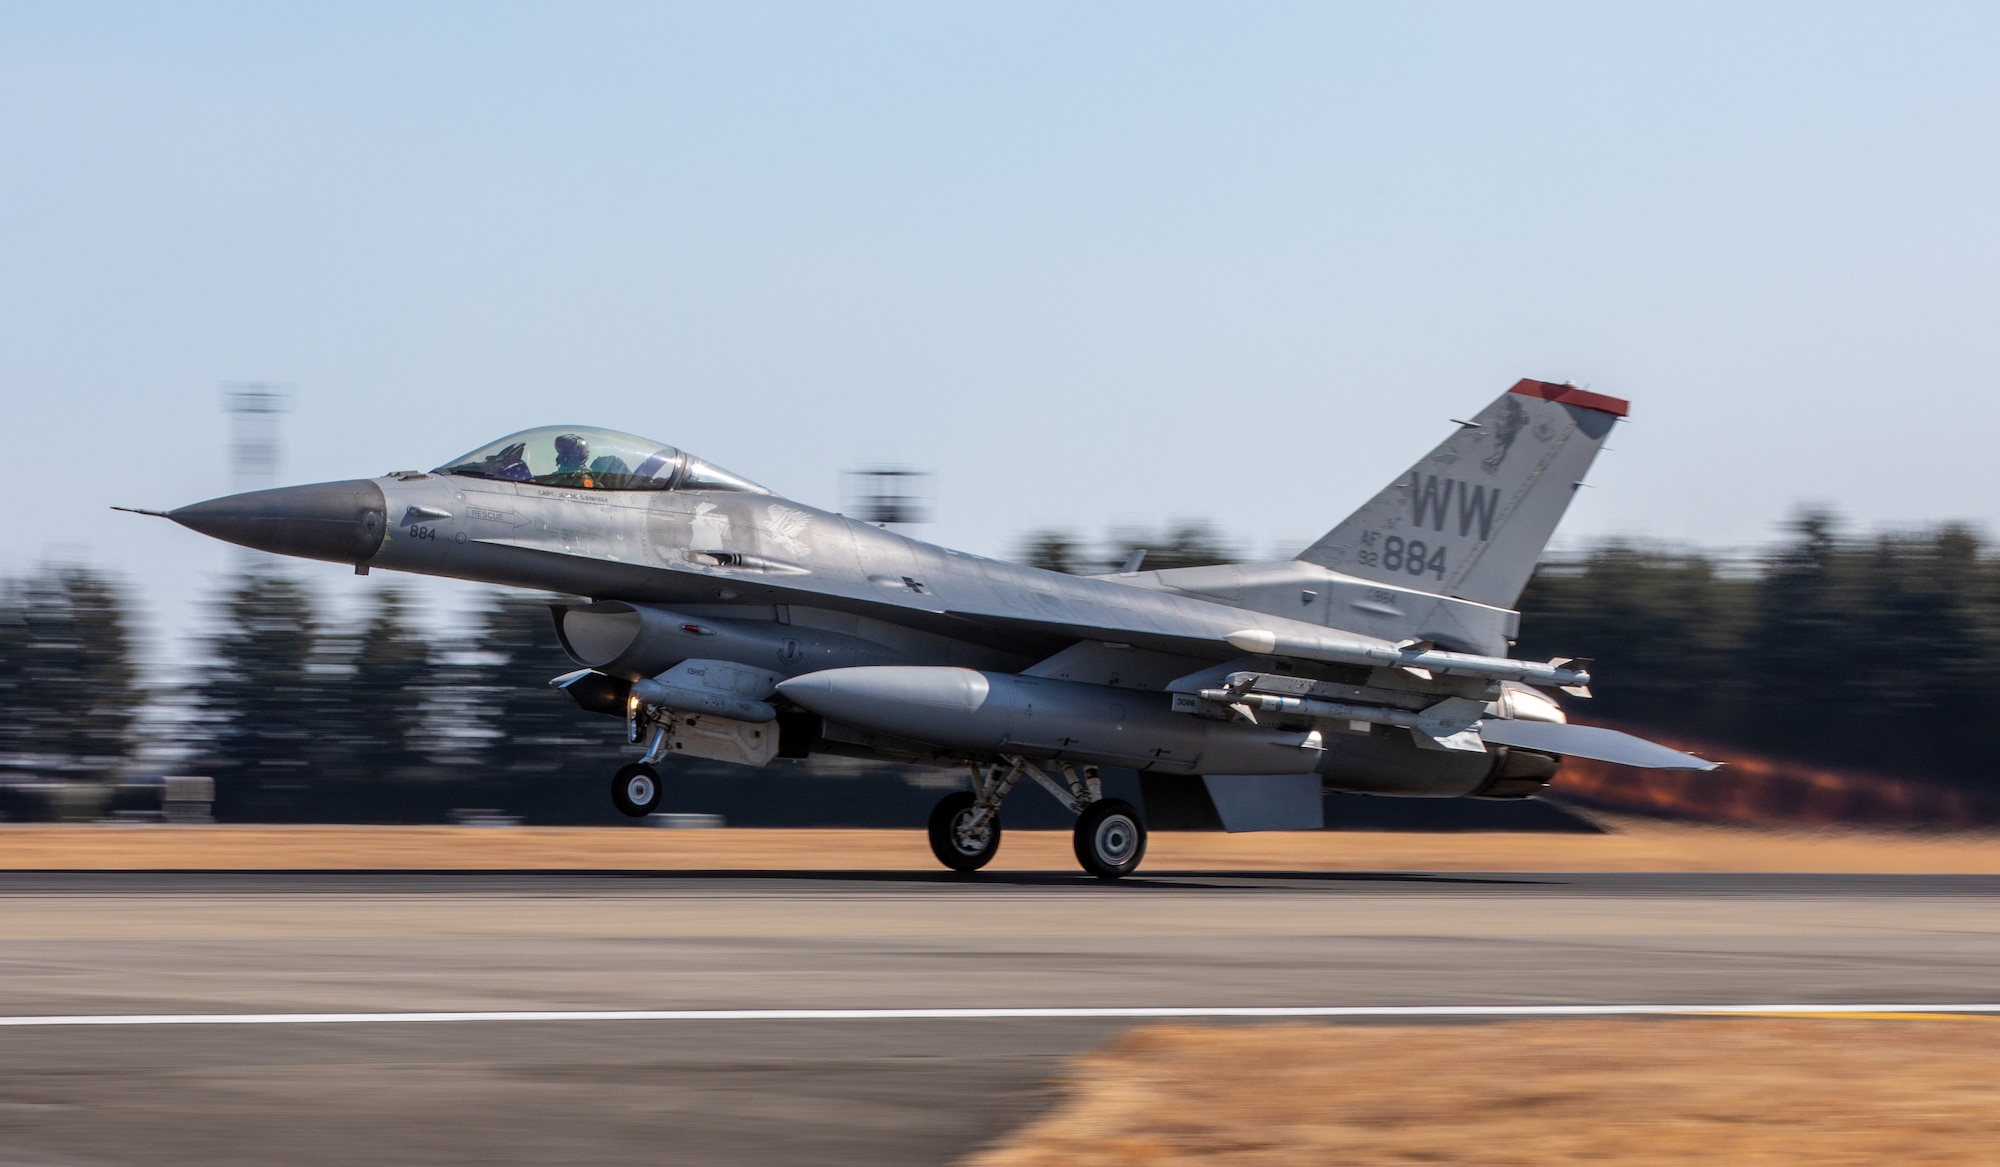 An F-16 Fighting Falcon takes off from the flightline. The photo is a side shot with a blurry background and sharp subject.